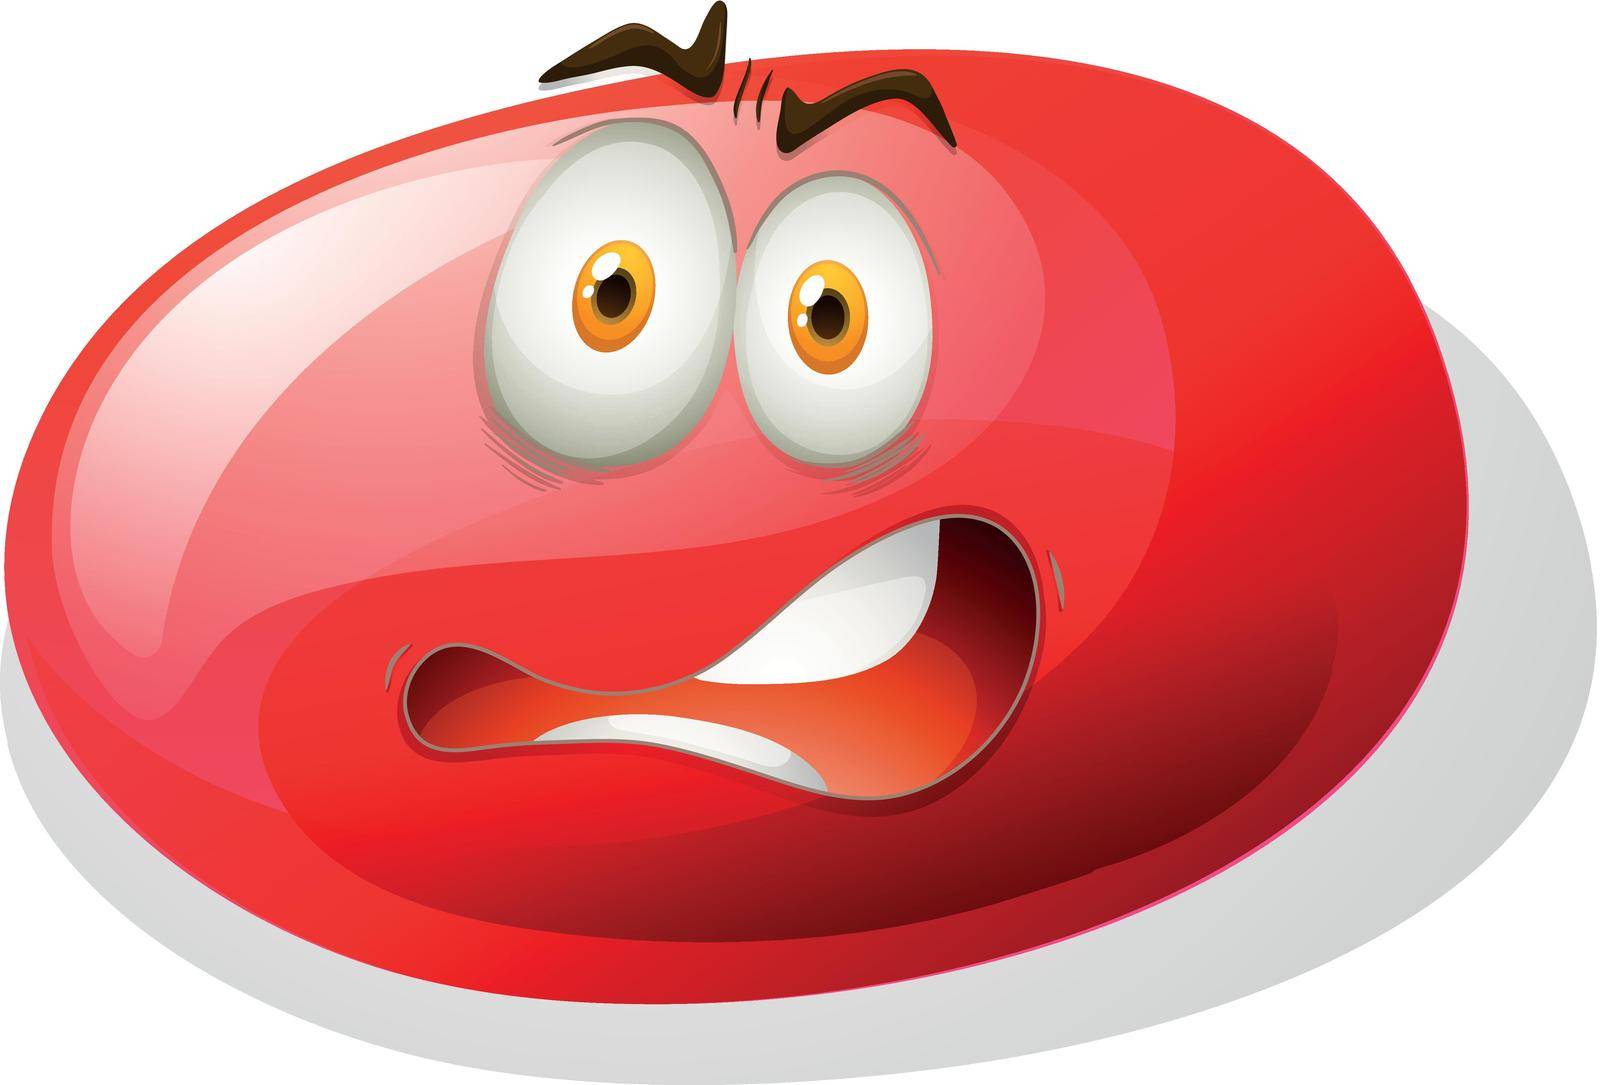 Red facial expression slime illustration